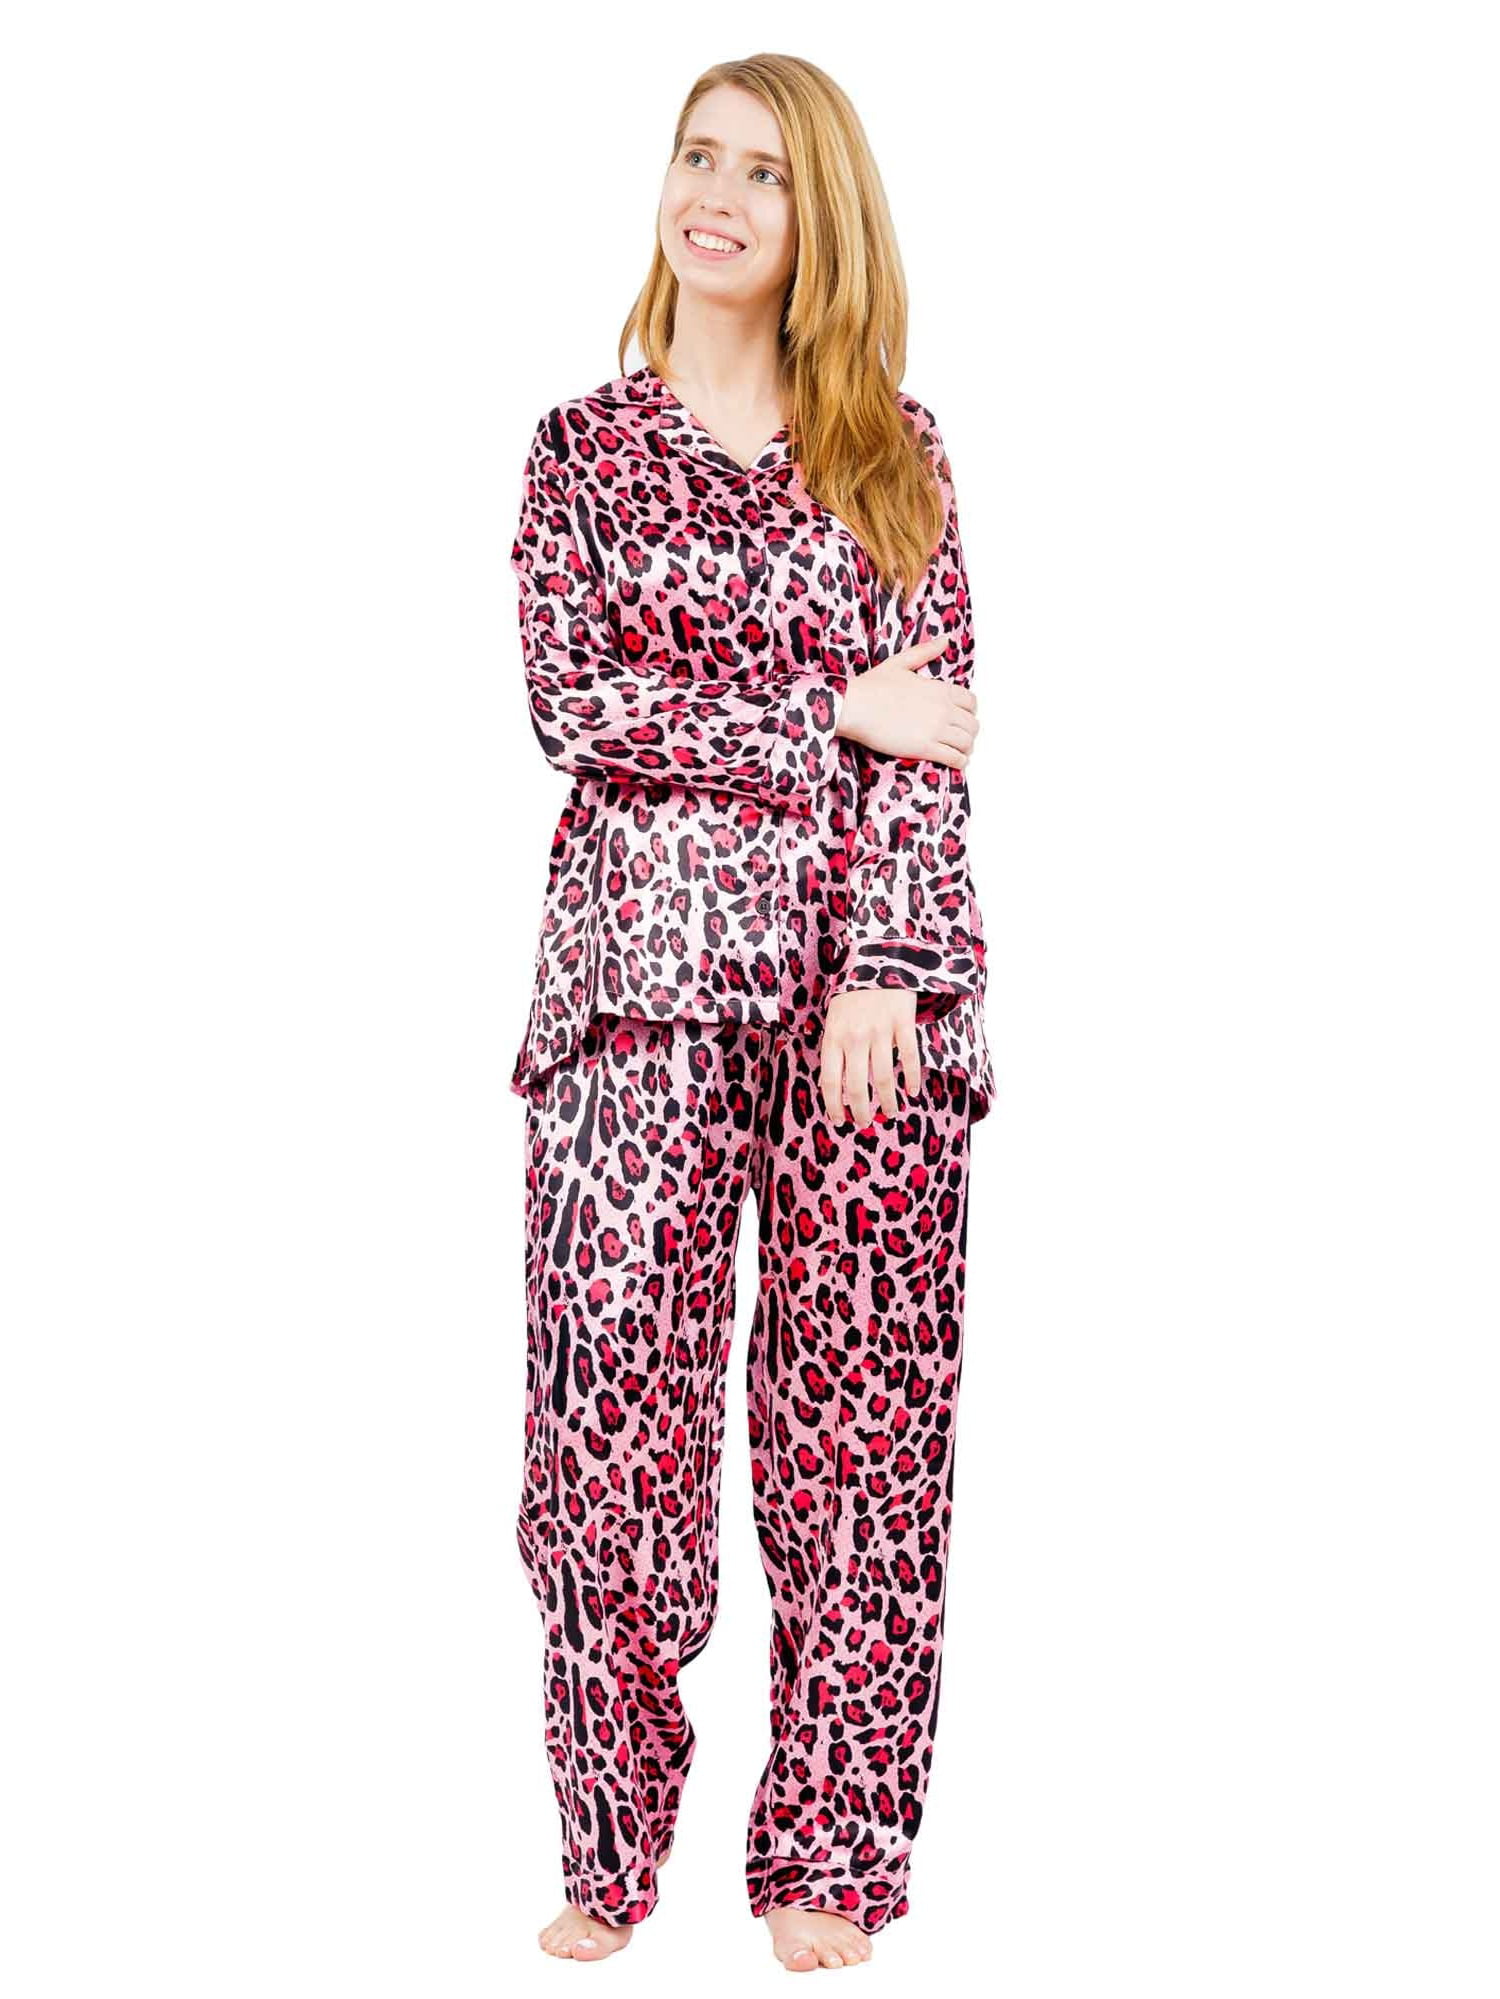 Up2date Fashion's Women's Classic Animal Print Pajama Sets in Various ...